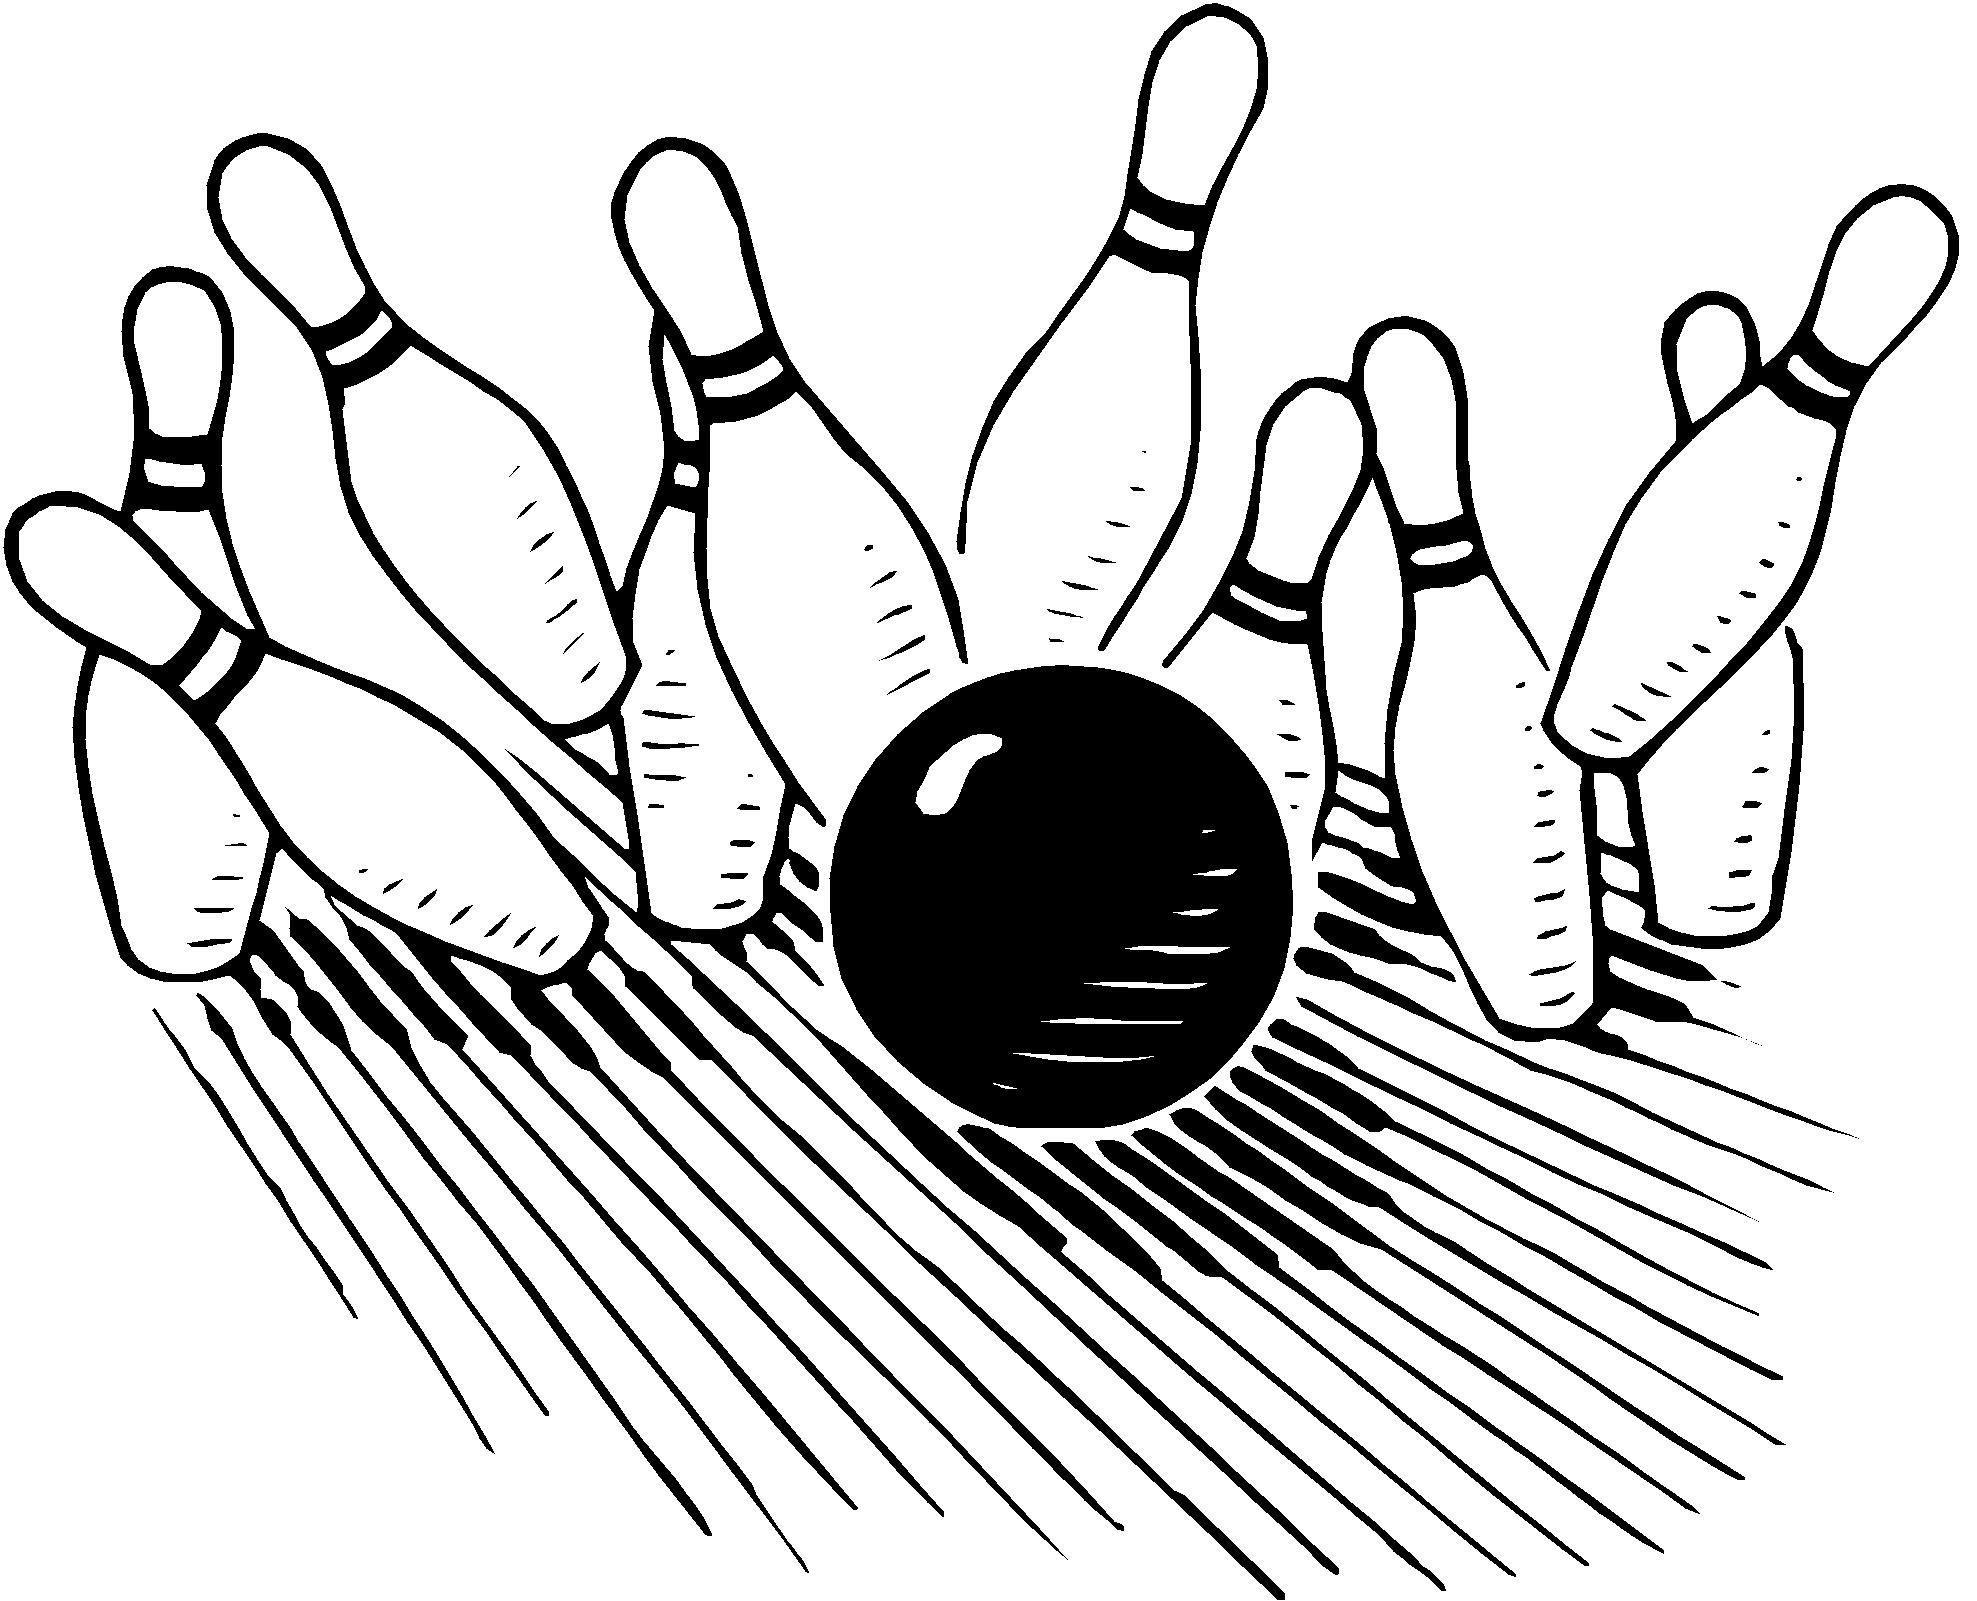 Clipart Bowling